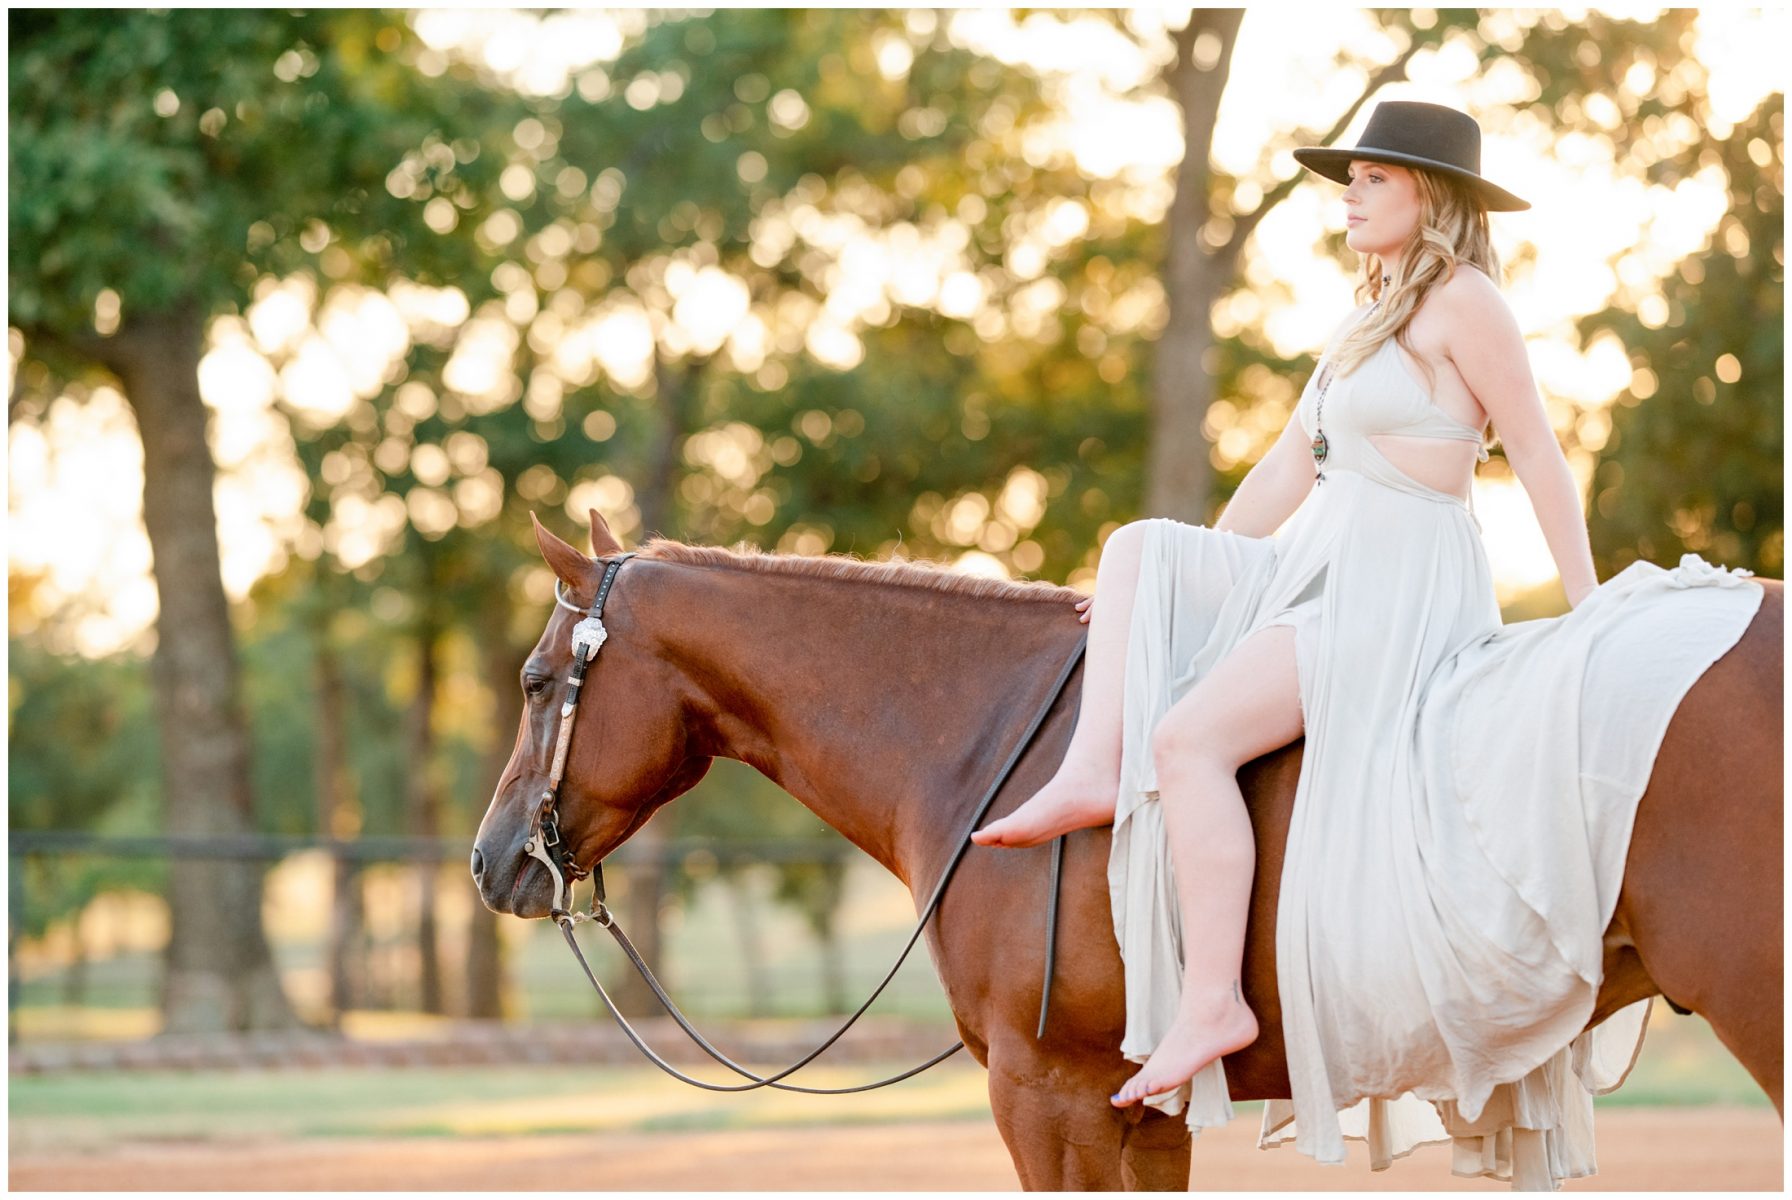 http://kirstiemarie.com/wp-content/uploads/2019/10/Millie-Anderson-and-Only-After-You-Vickery-Performance-Horses-Pilot-Point-Texas-AQHYA-Kirstie-Marie-Photography_0013-1.jpg